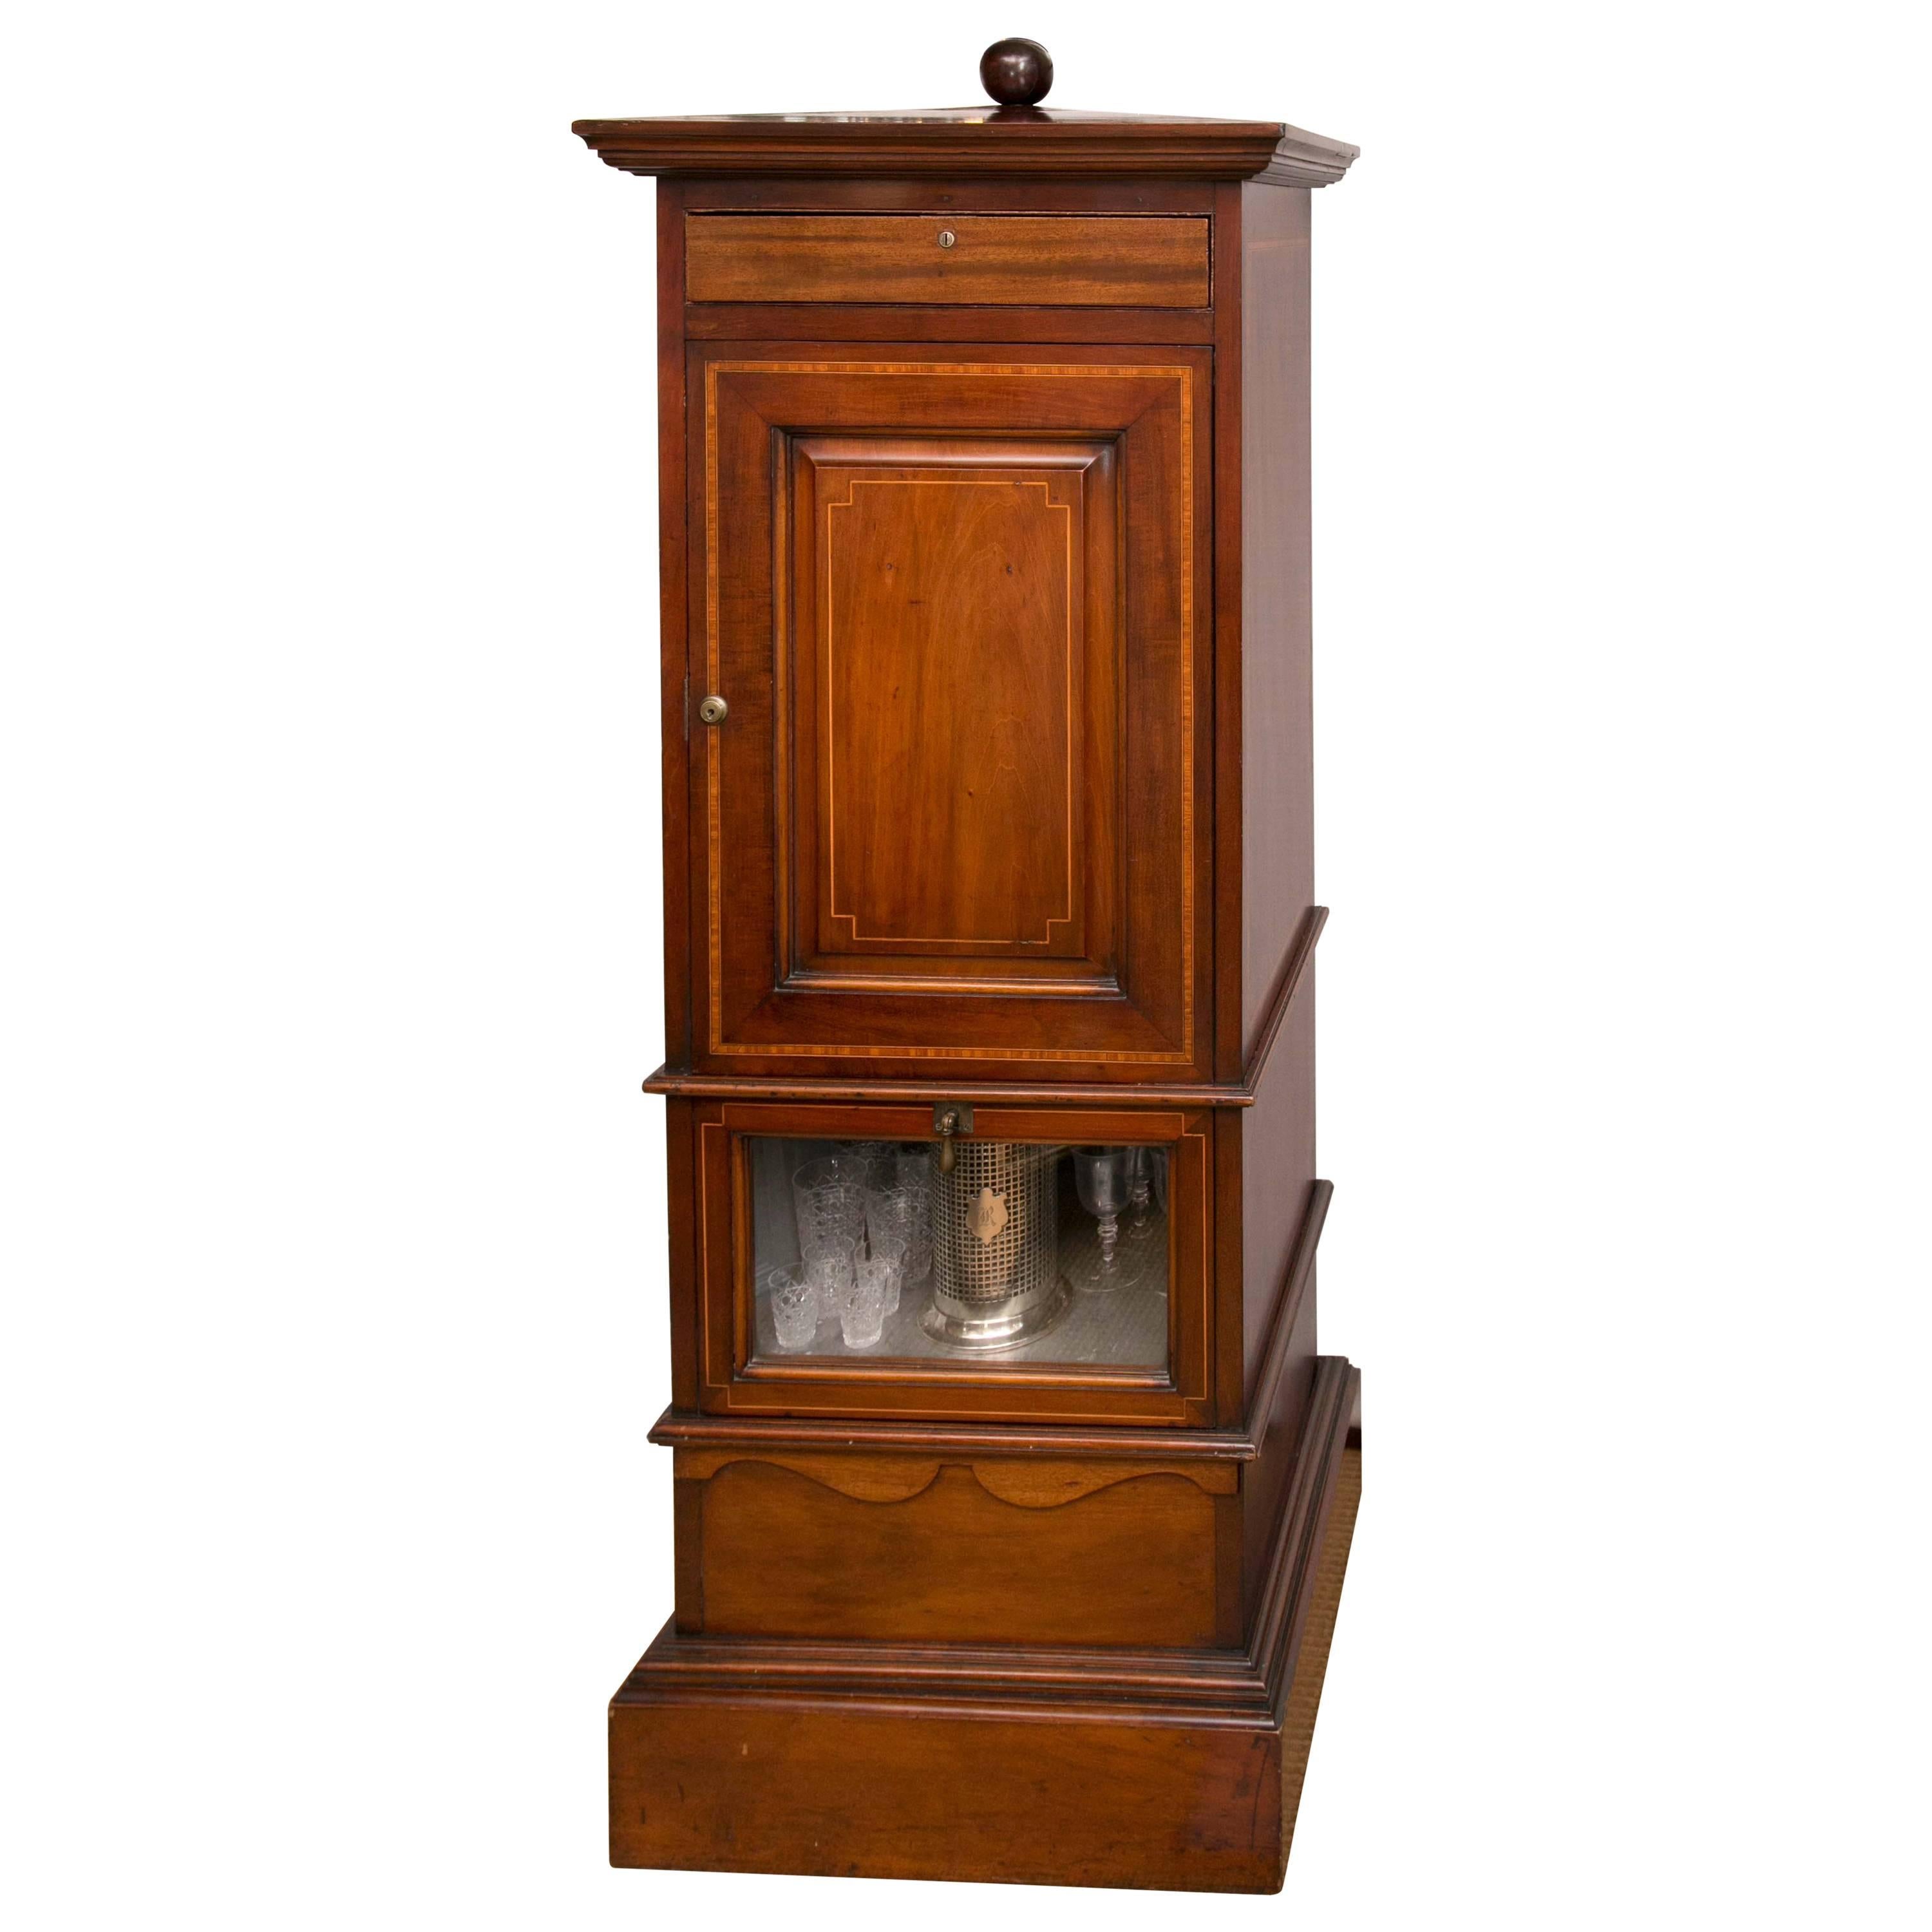 1920s Mahogany Dry Bar, Complete with Humidor and Game Compendium